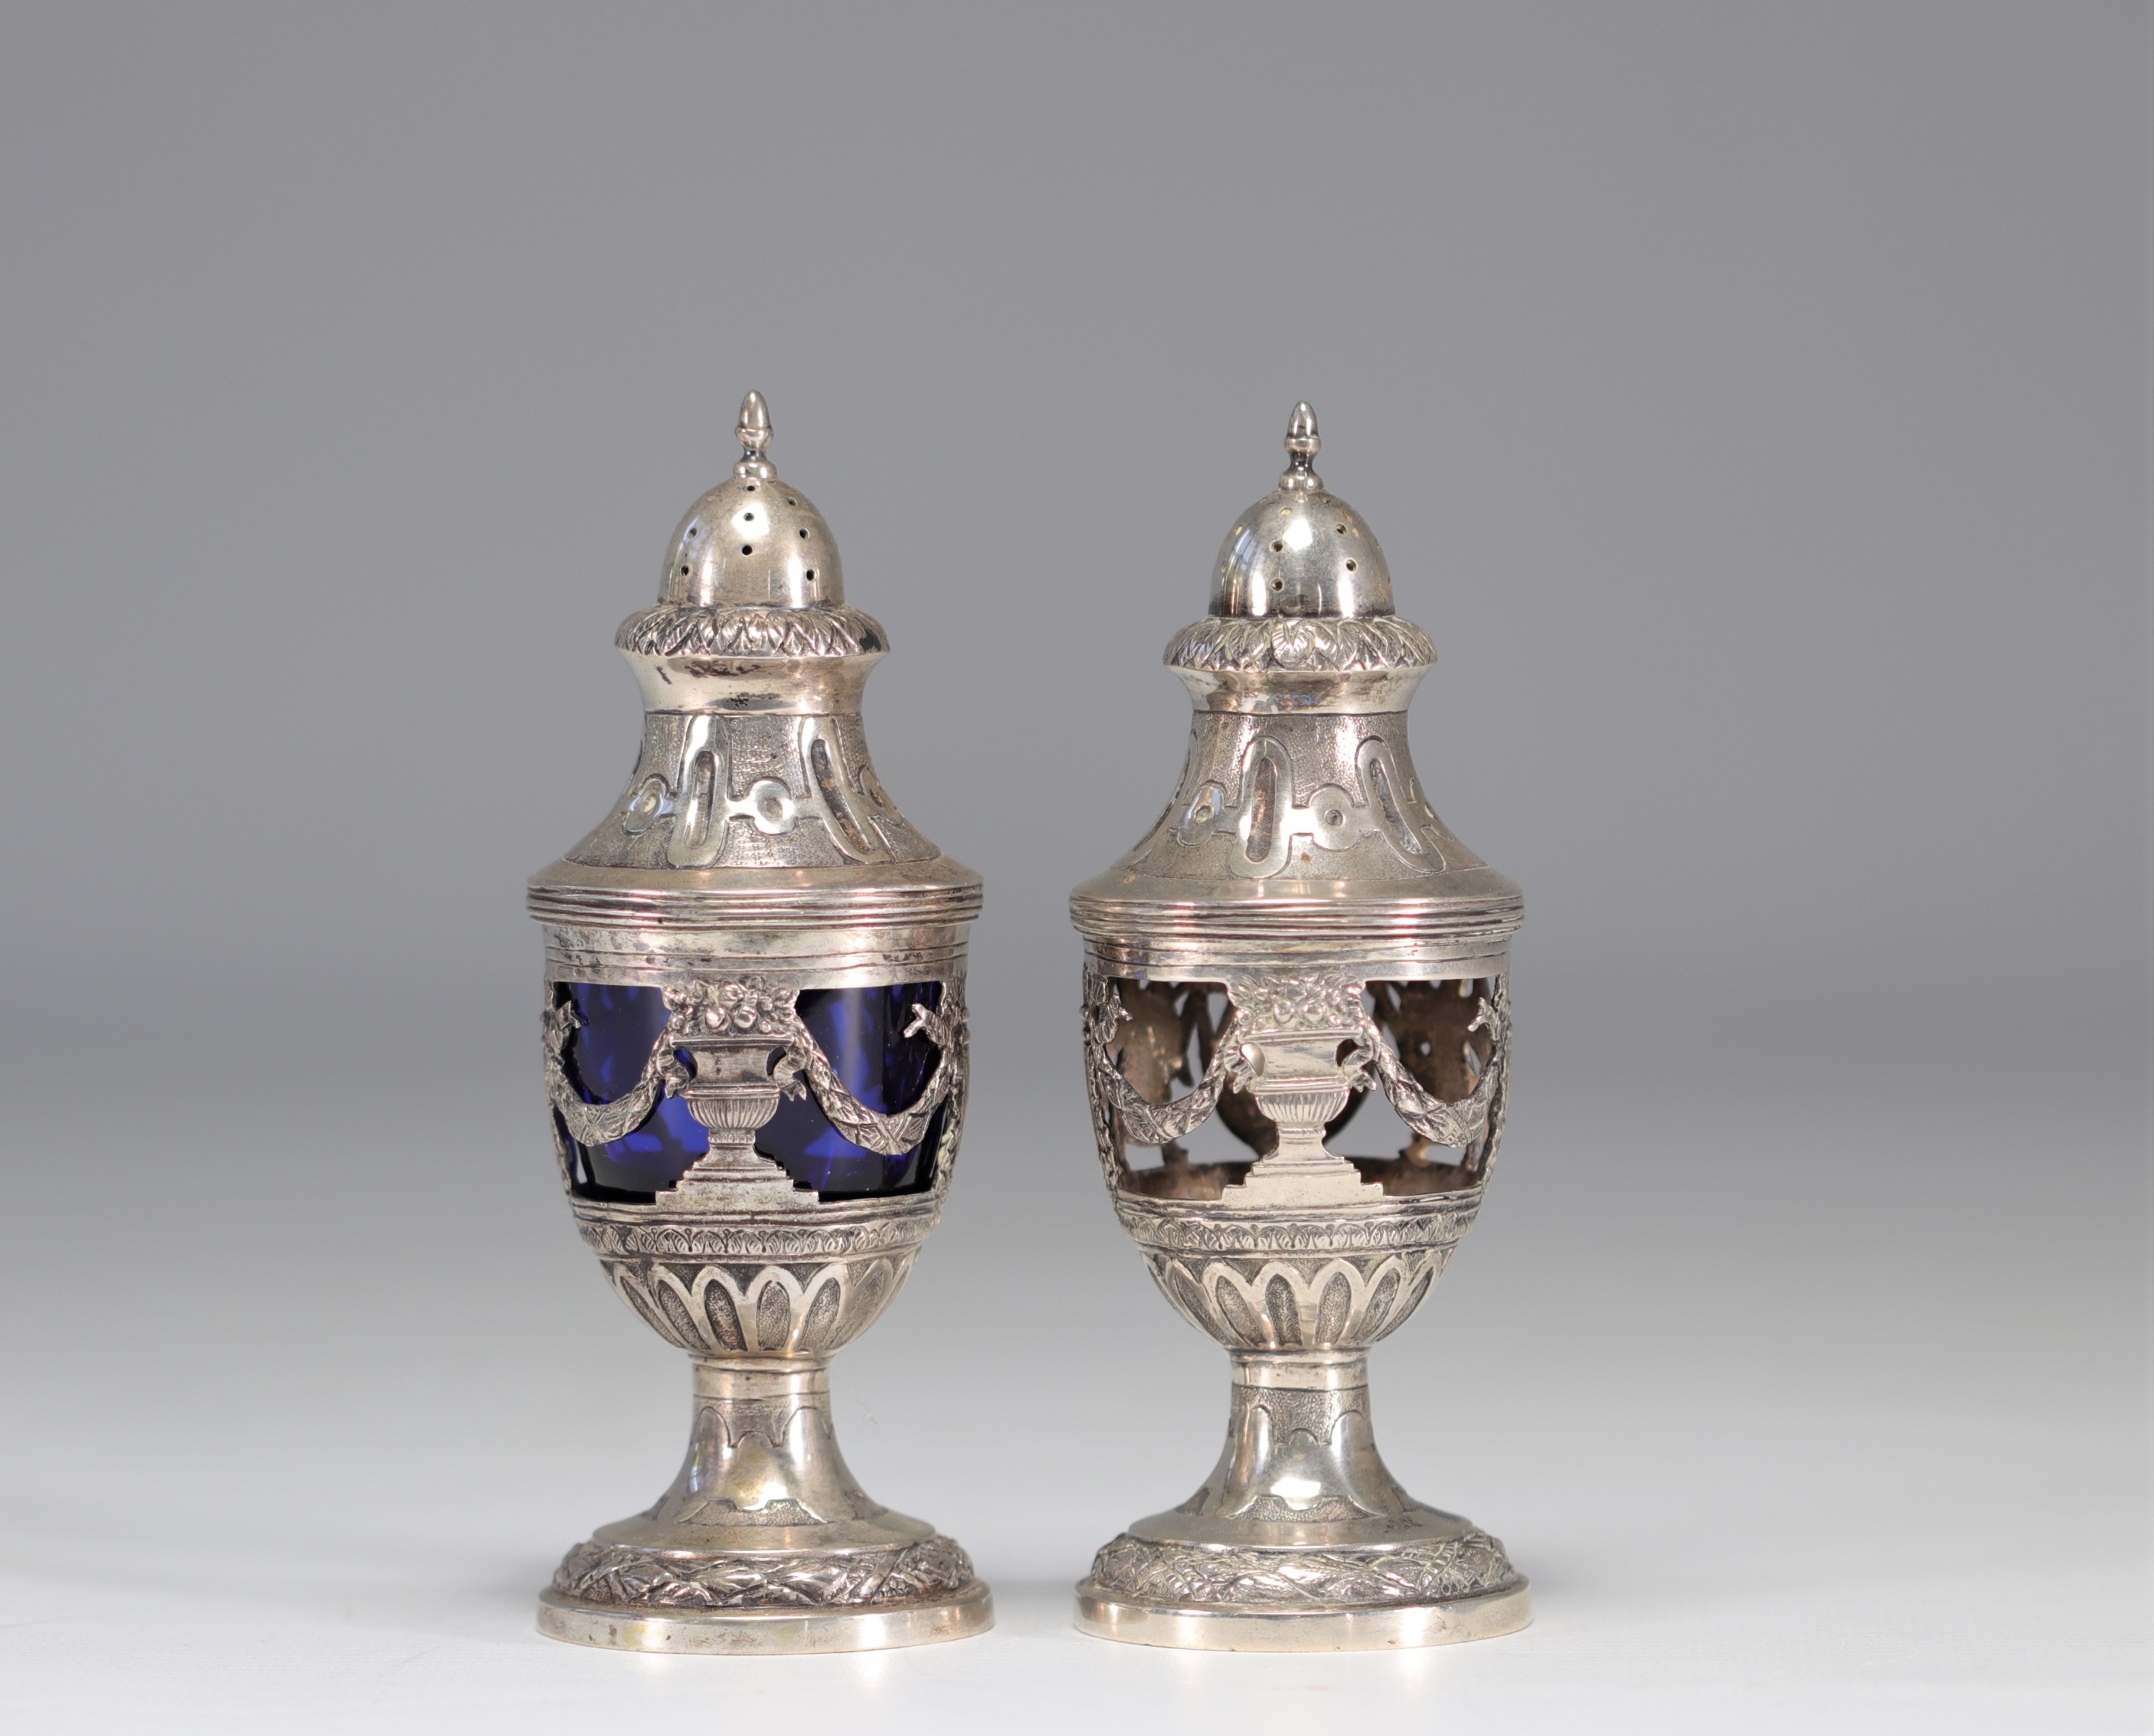 Solid silver sprinklers with Reims hallmarks from the 18th century - Image 4 of 5